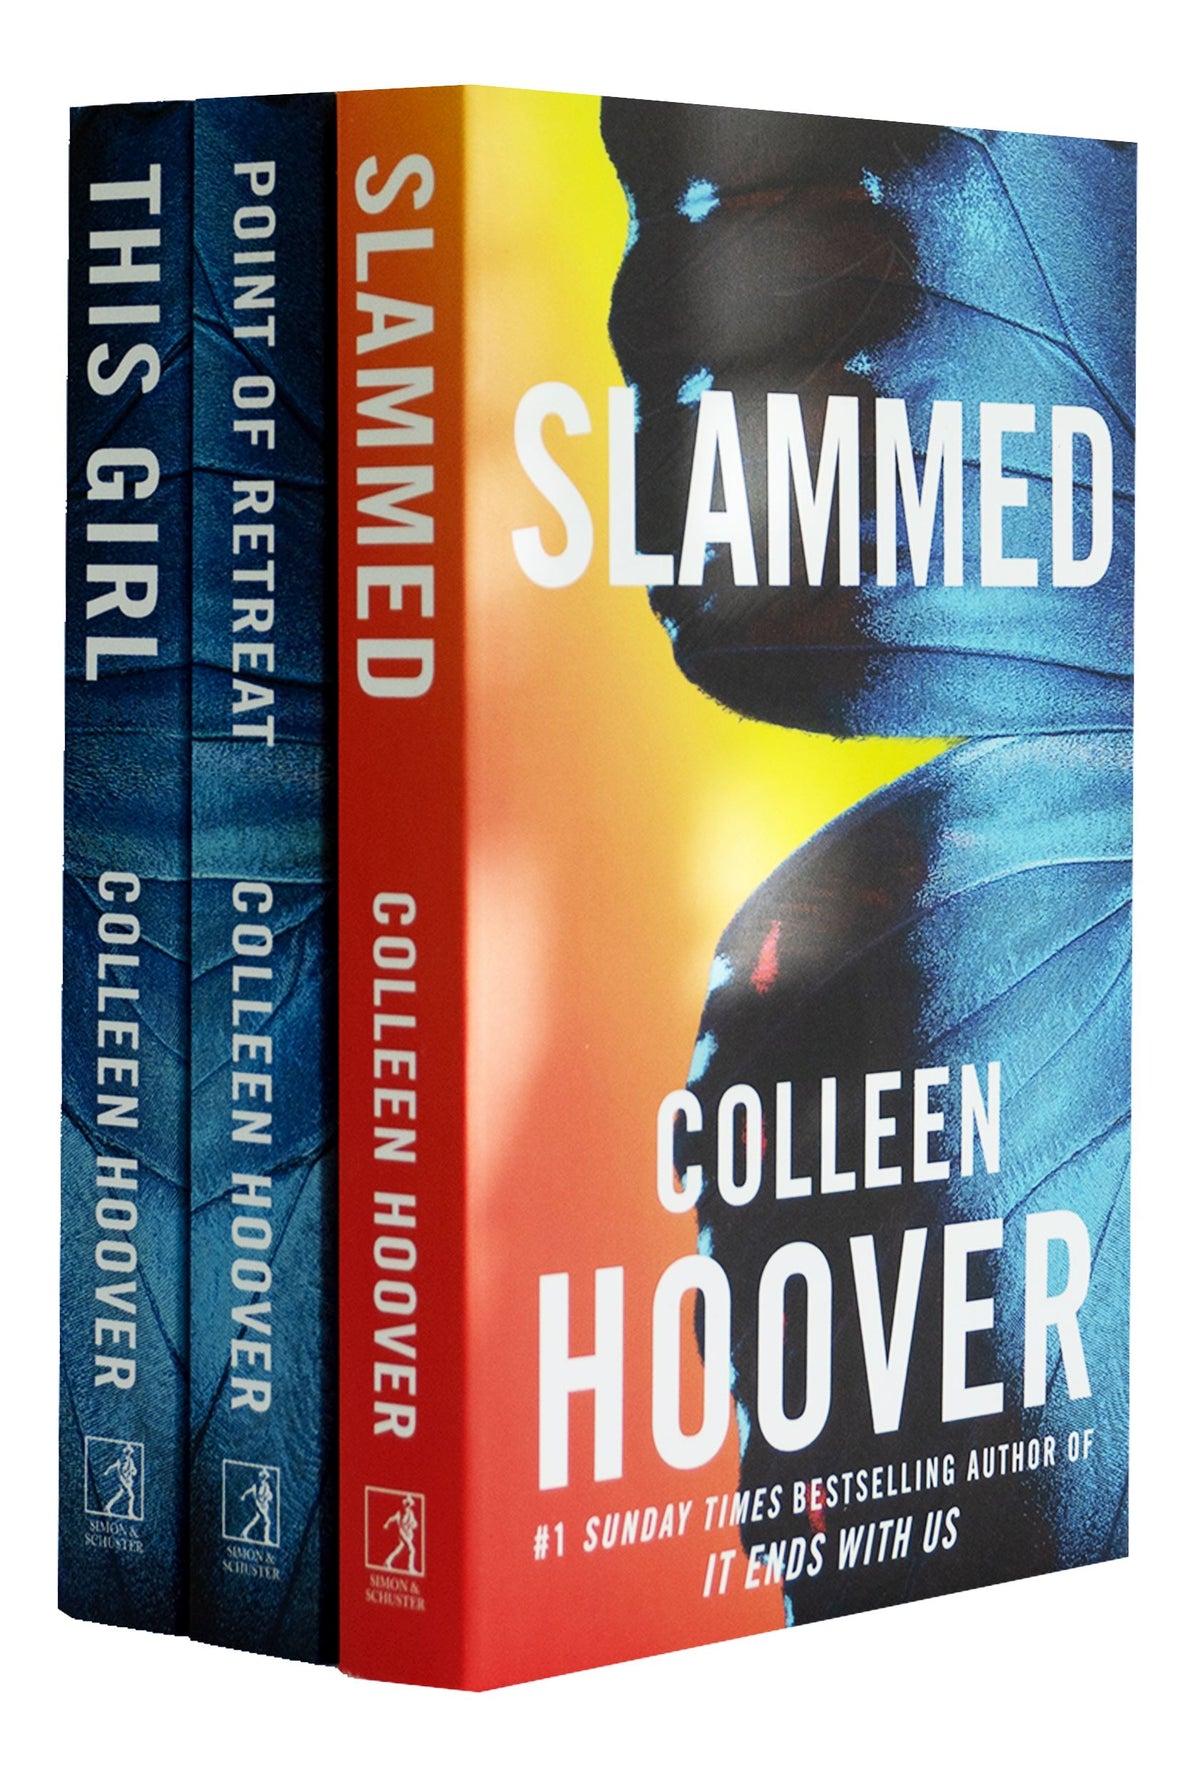 Verity by Colleen Hoover (Author) - Inspire Uplift